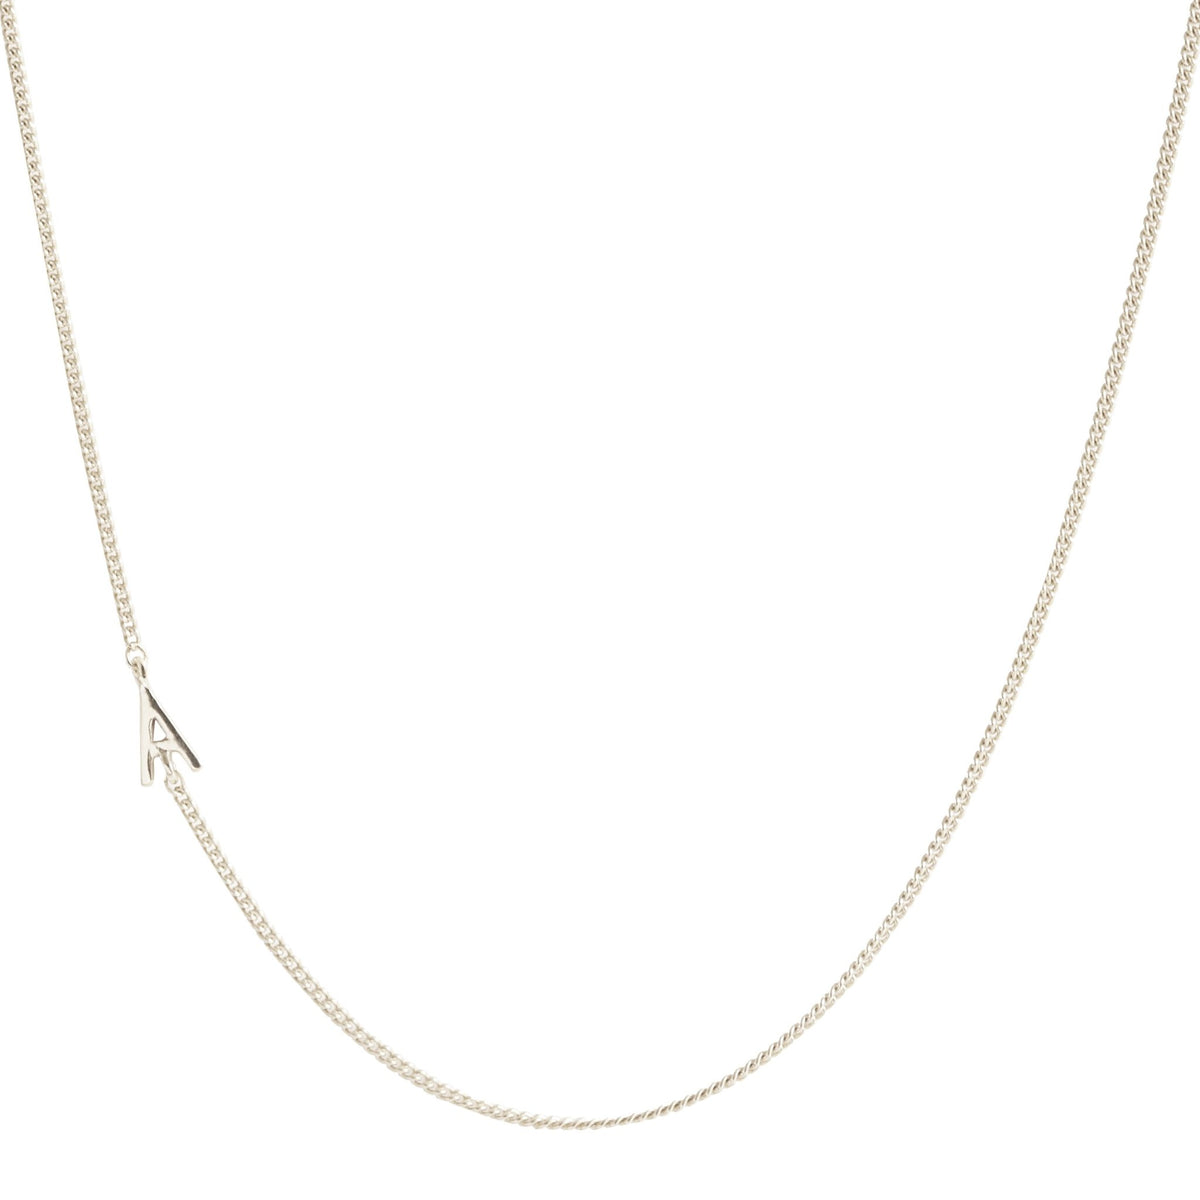 NOTABLE OFFSET INITIAL NECKLACE - A - GOLD, ROSE GOLD, OR SILVER - SO PRETTY CARA COTTER